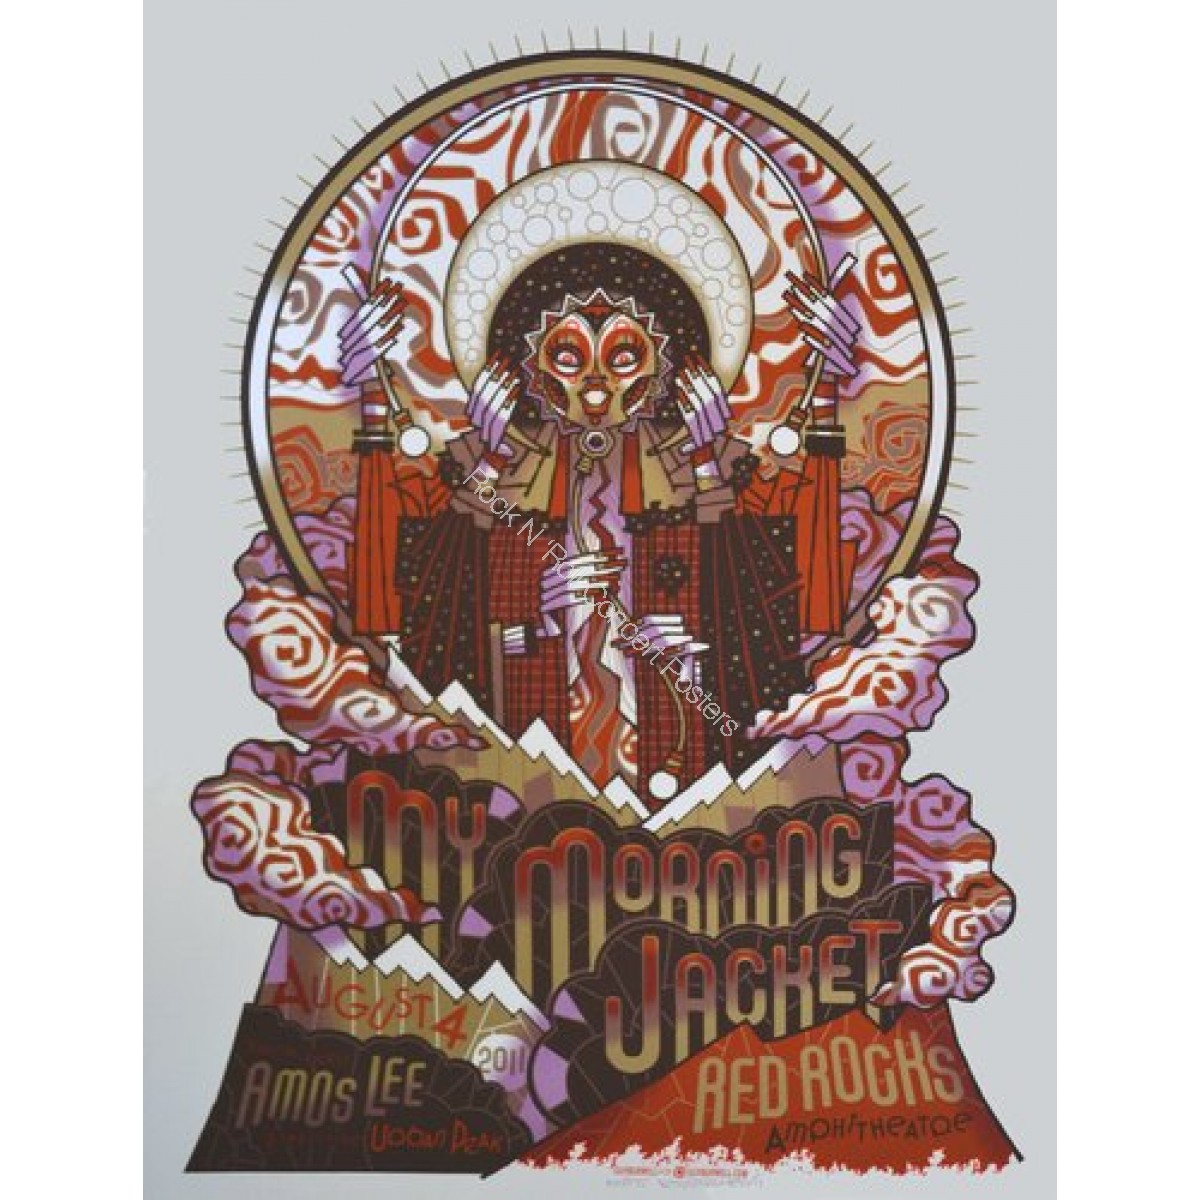 My Morning Jacket & Amos Lee @ Red Rocks 8/4/11 Limited Edition Print S/N Edition of 275 By Guy Burwell